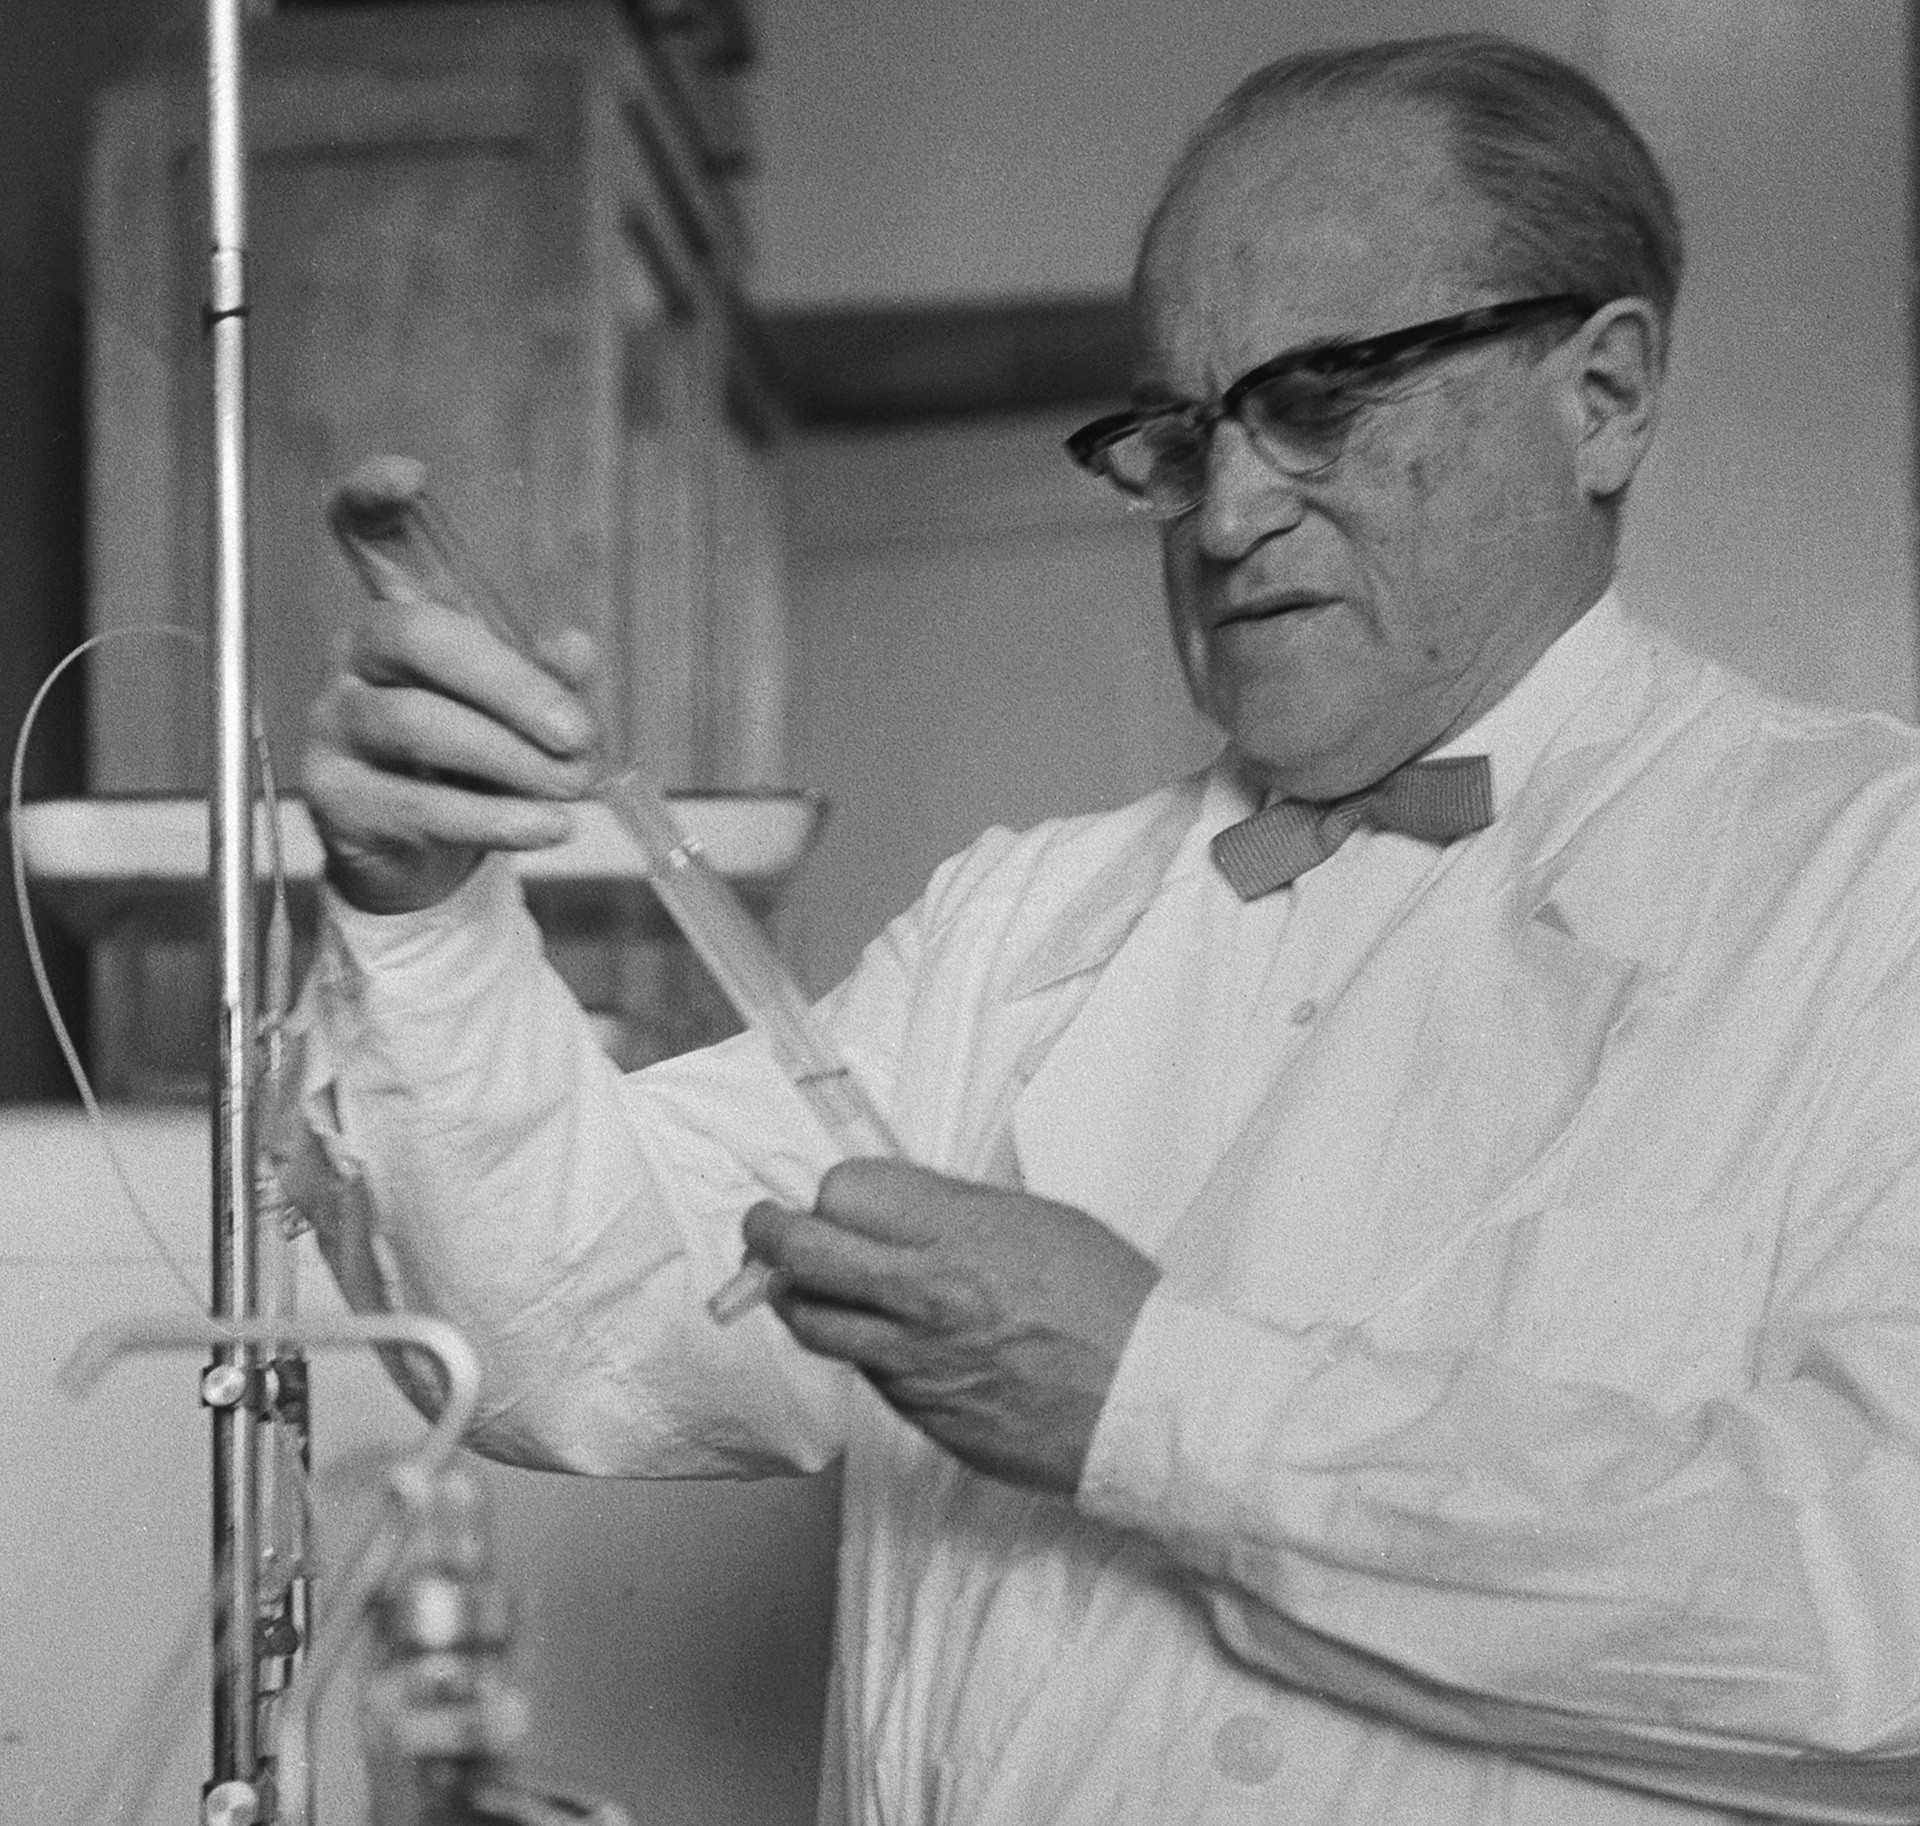 Lev Zilber working in a laboratory of the Scientific Research Institute of Epidemiology and Microbiology